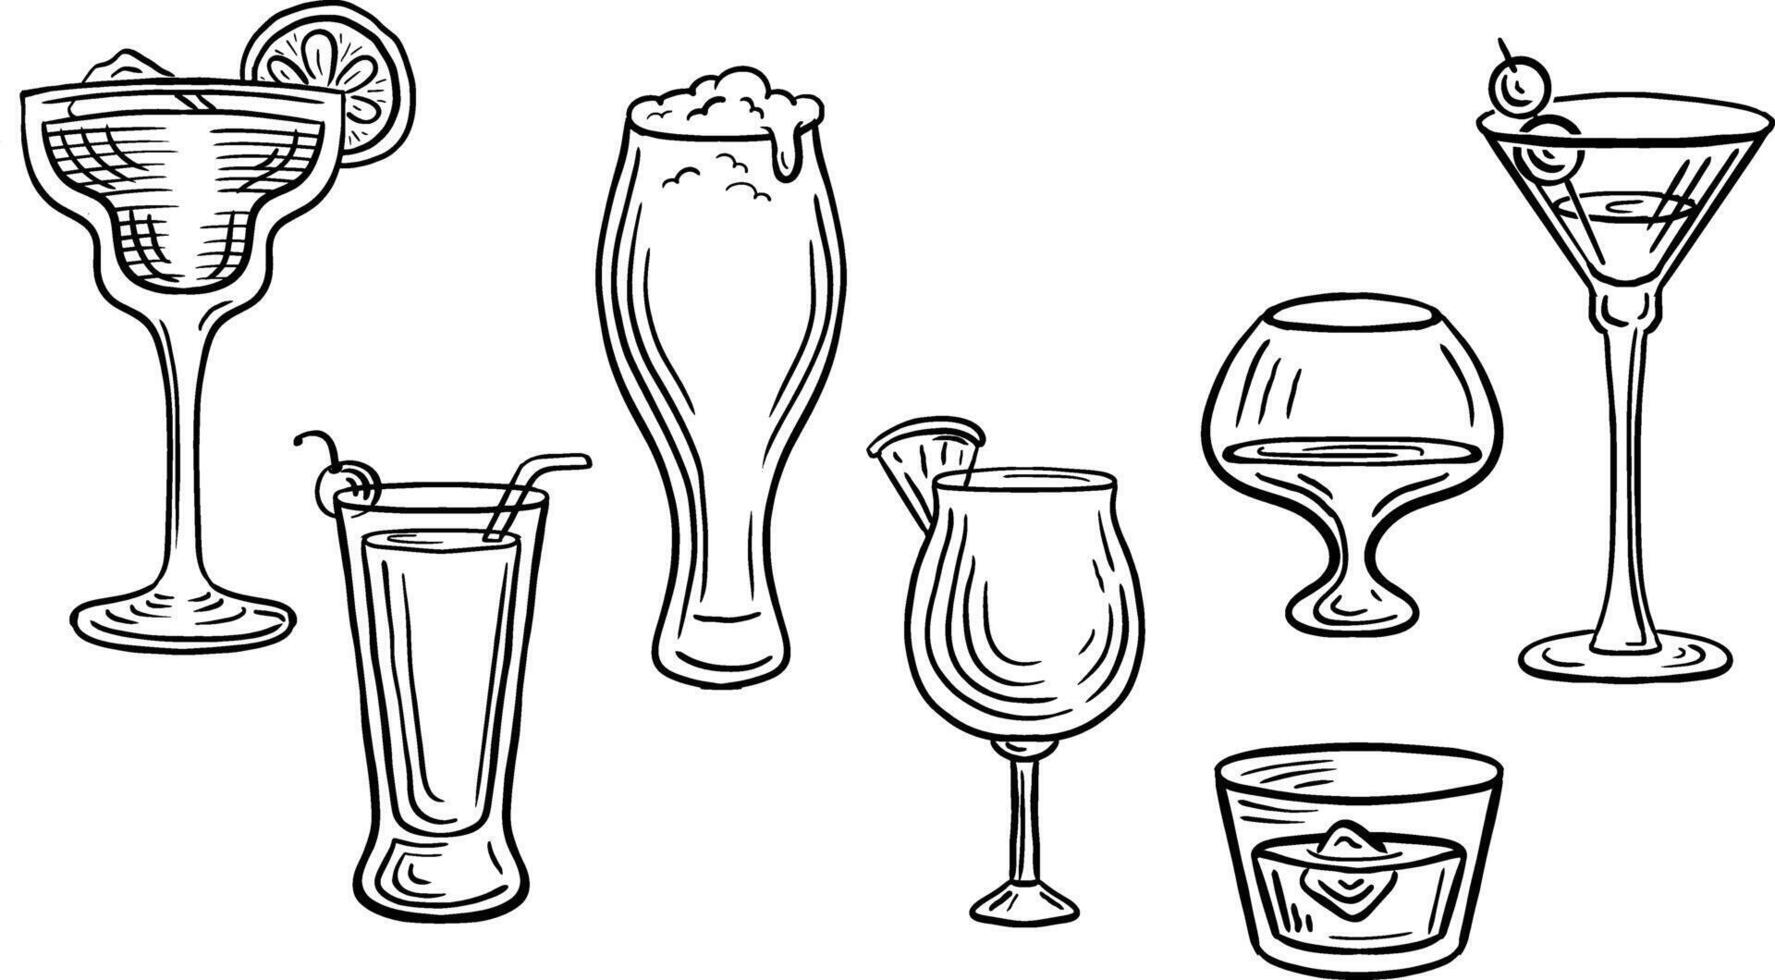 cocktail drink glasses hand drawn engraved sketch drawing vector